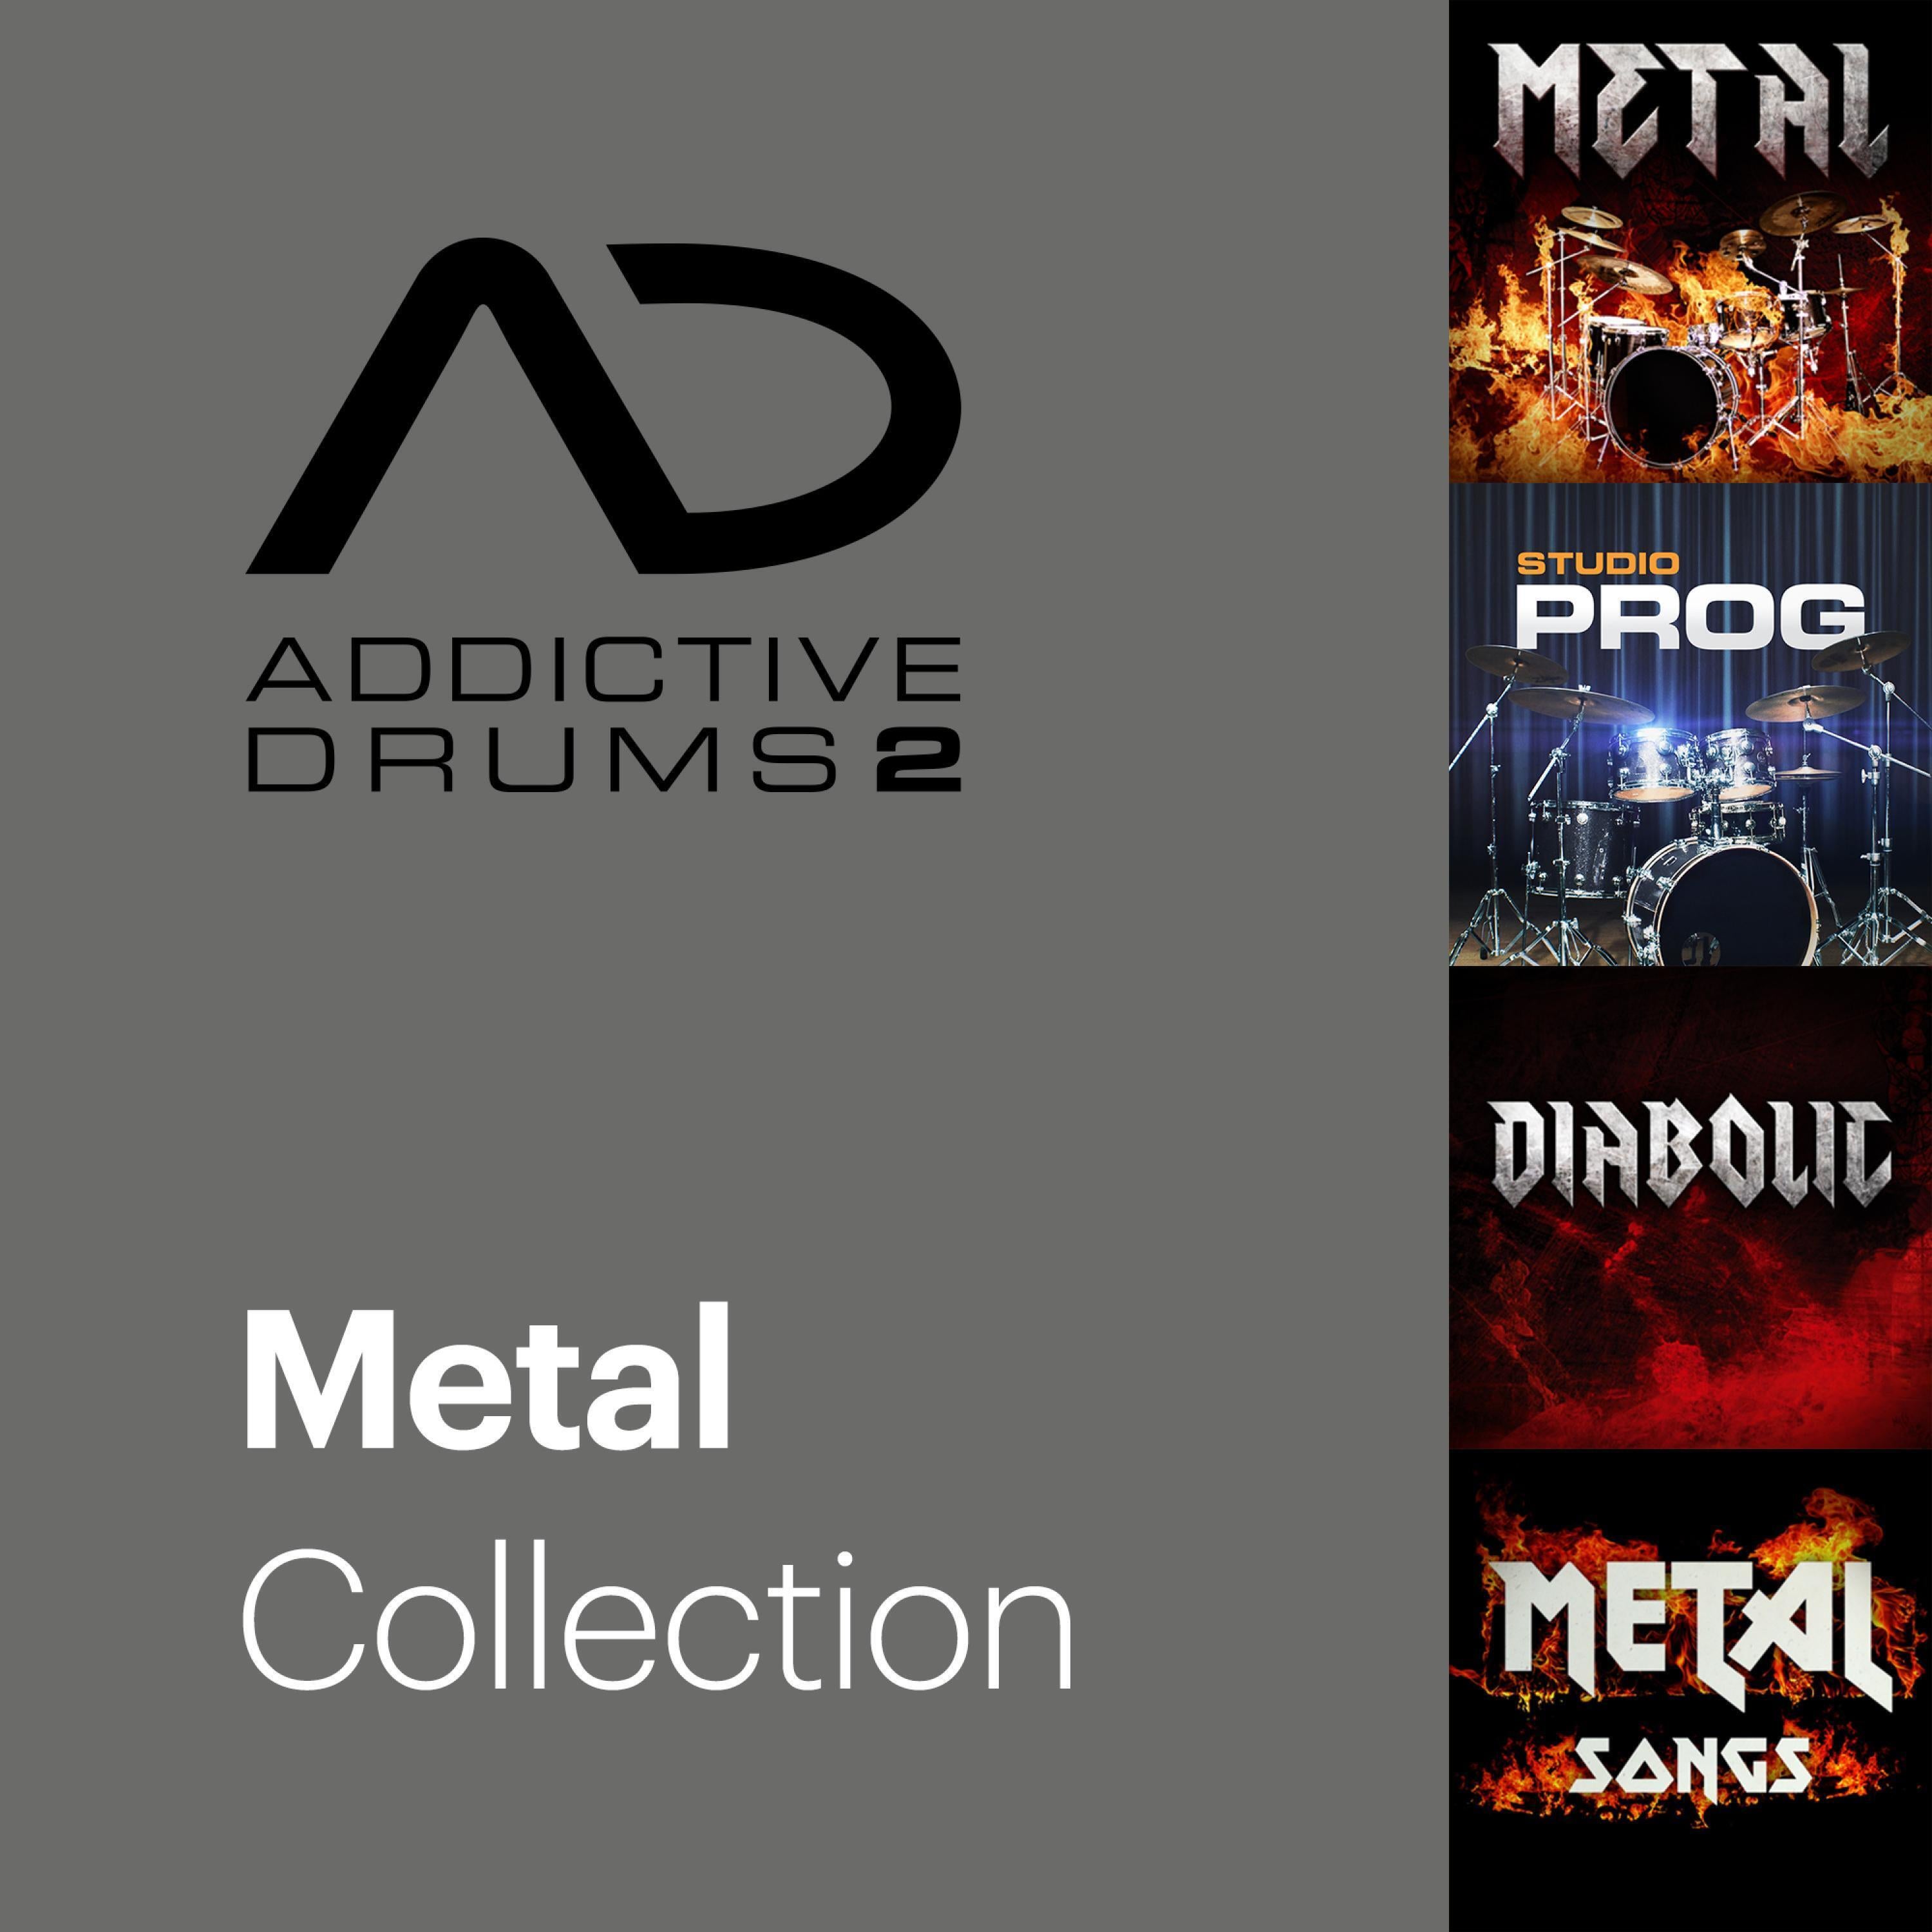 Addictive Drums 2: Metal Collection Expansion Pack - Sweetwater